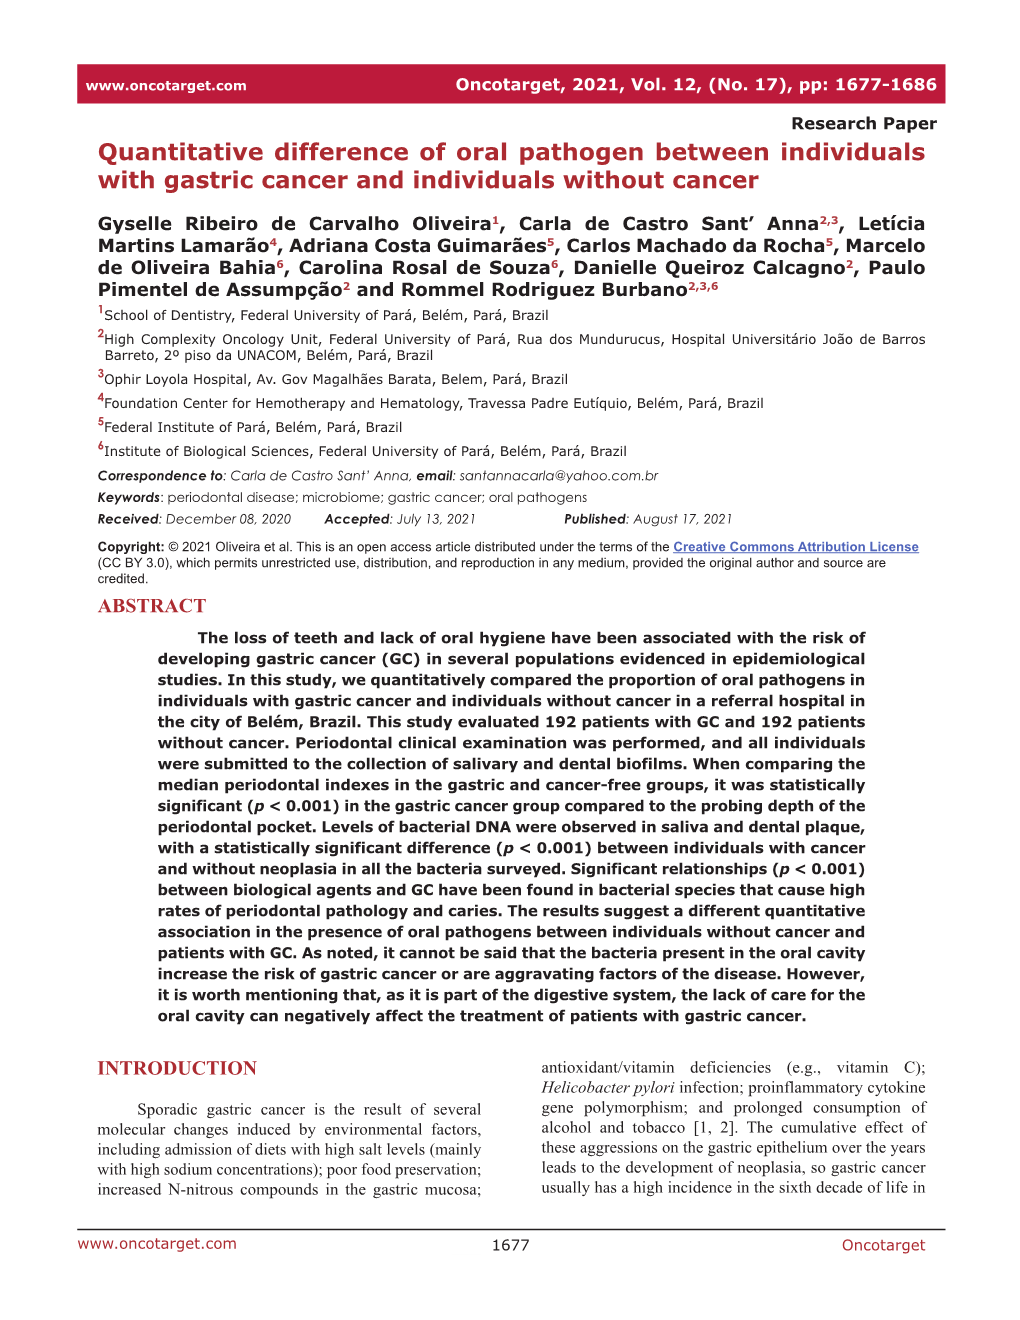 Quantitative Difference of Oral Pathogen Between Individuals with Gastric Cancer and Individuals Without Cancer